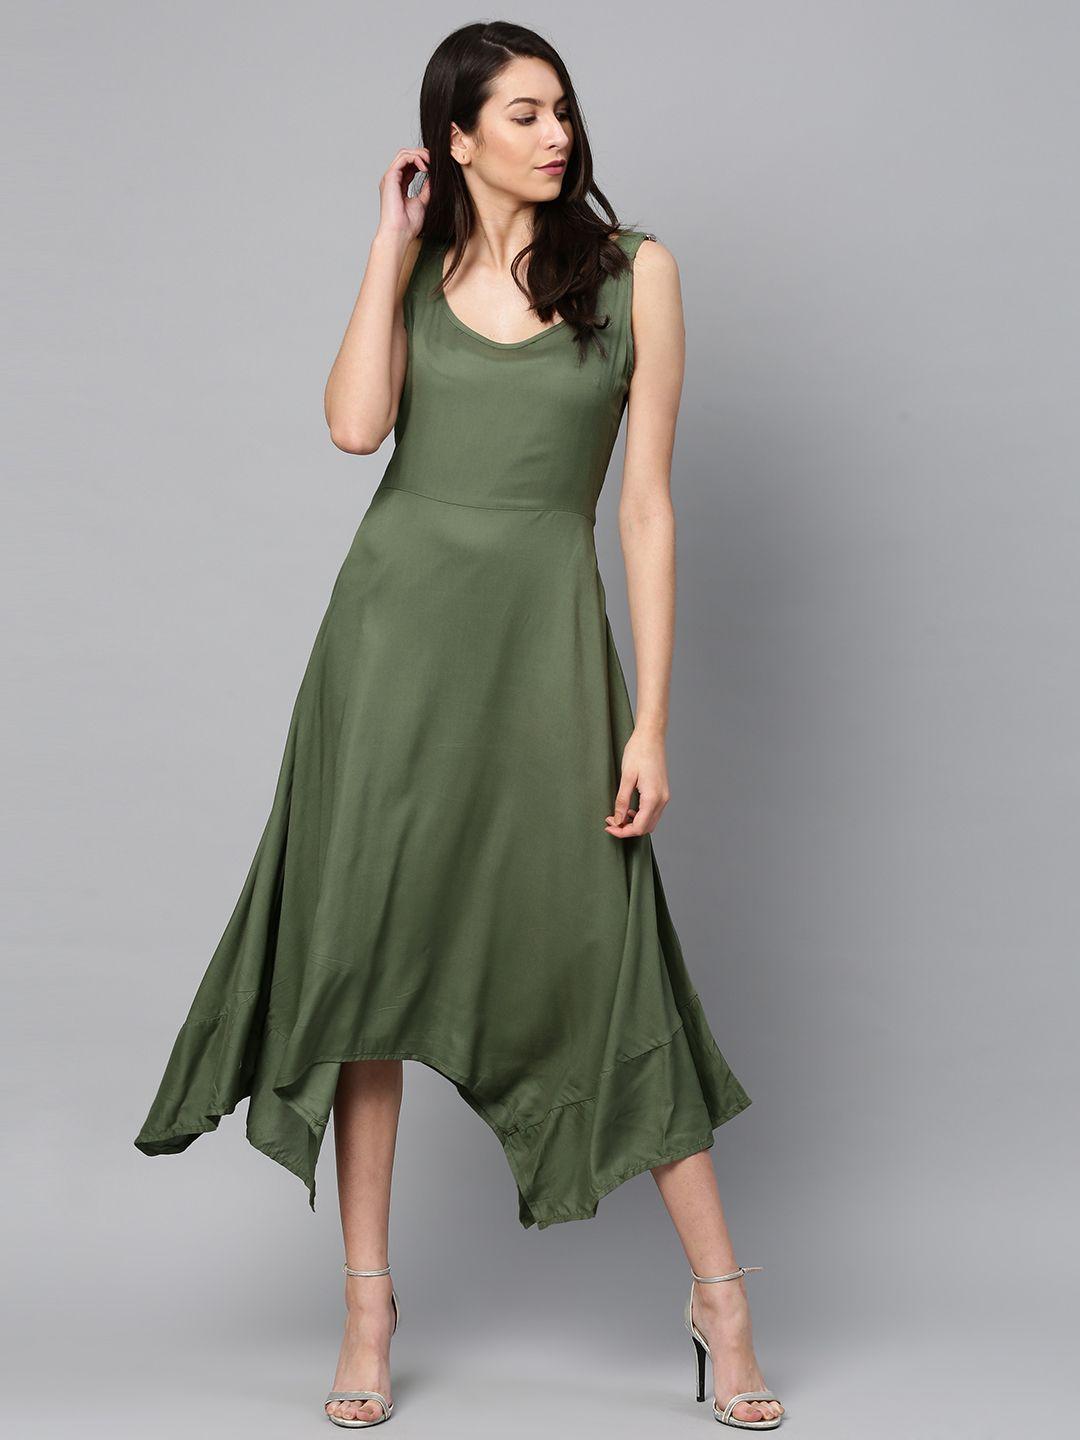 tokyo-talkies-women-olive-green-solid-fit-and-flare-dress